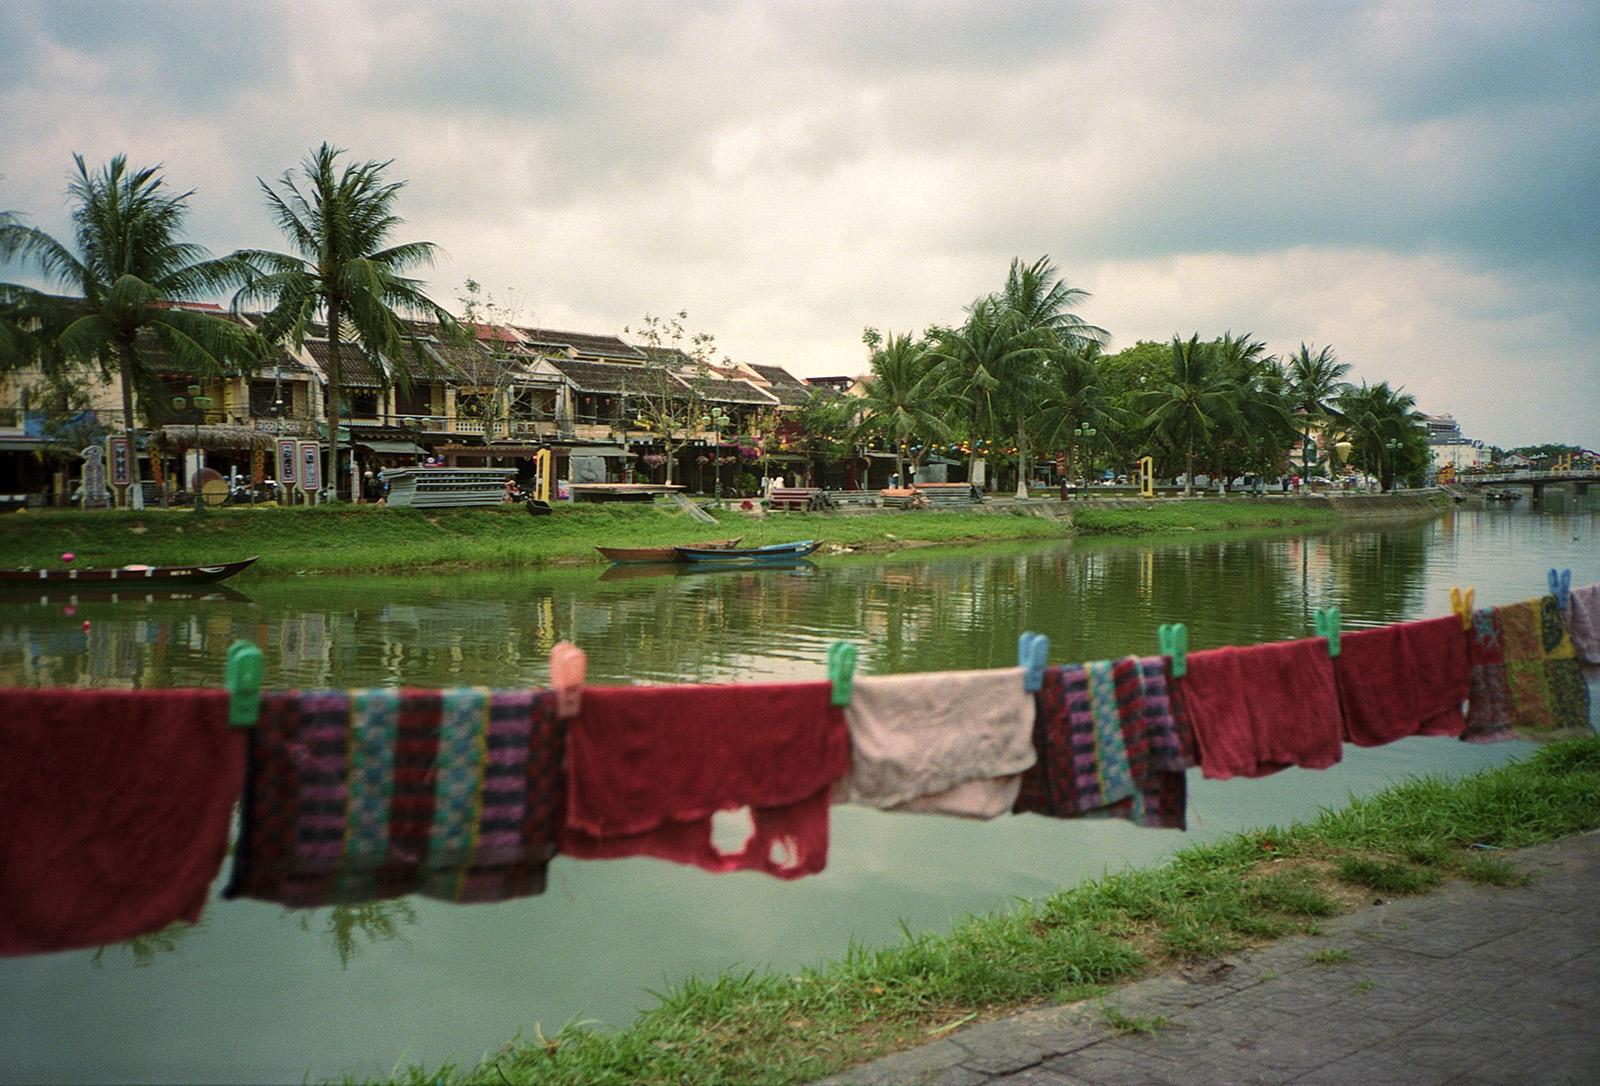 Clothes on the washing line overlooking Thu Bồn River in Hoi An, Vietnam.